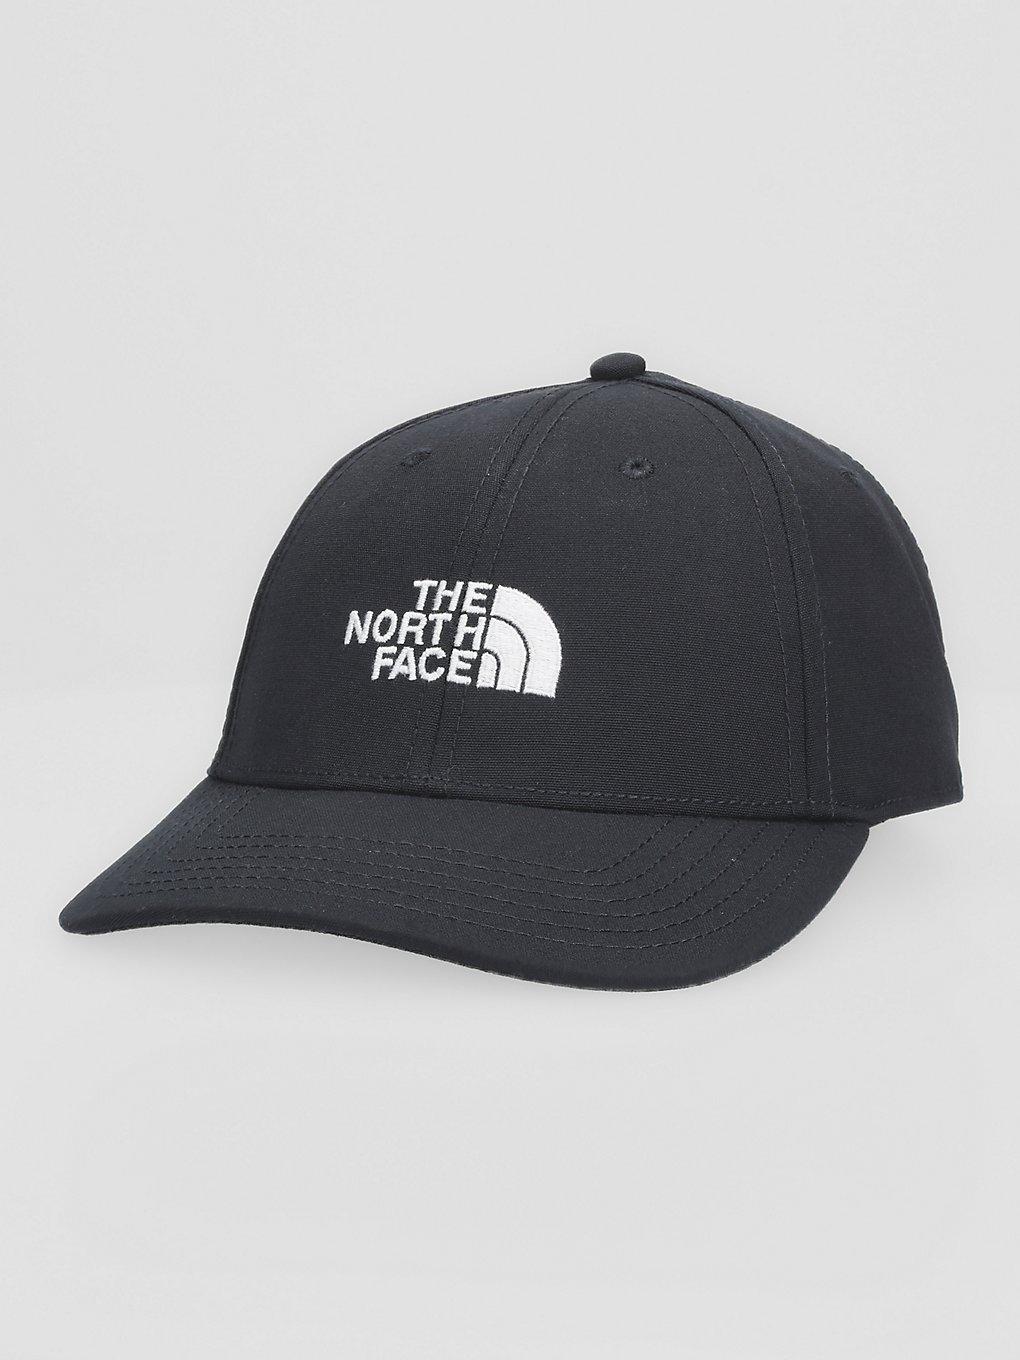 THE NORTH FACE Recycled 66 Classic petje zwart